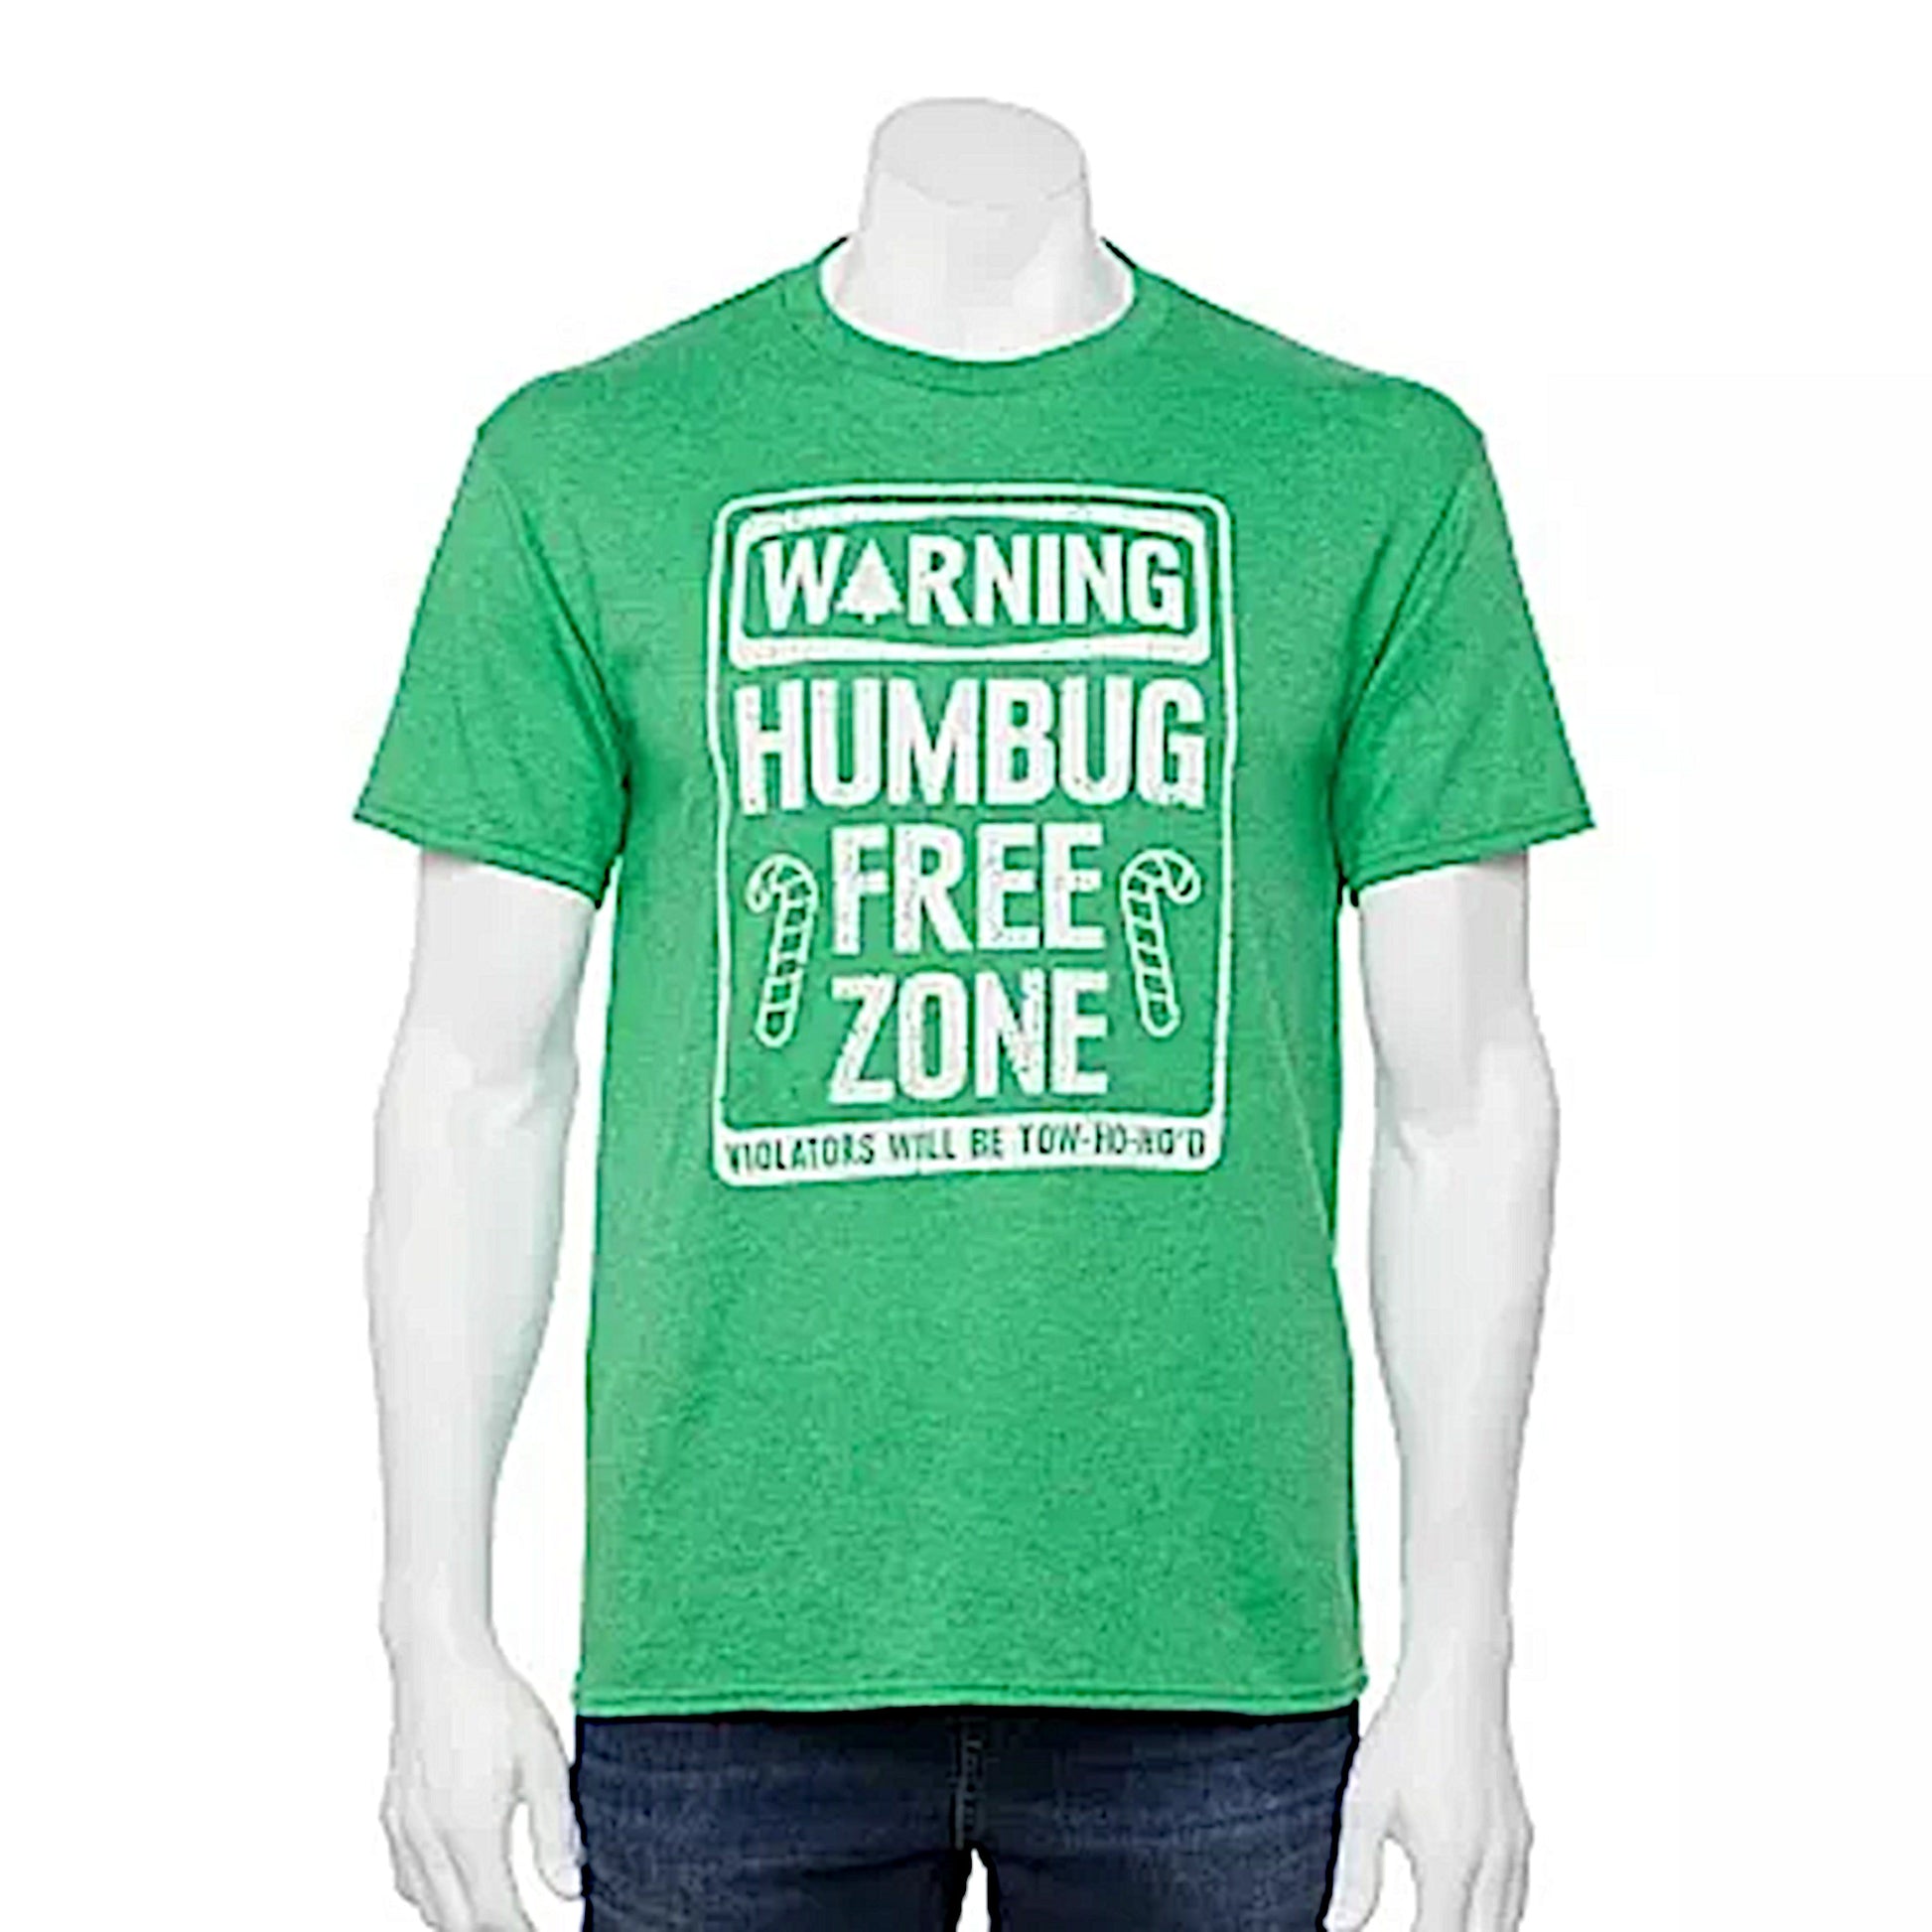 Men's Graphic T-shirt | Adult Humor | Humbug Free Zone Tee - Celebrate Together - Shirts